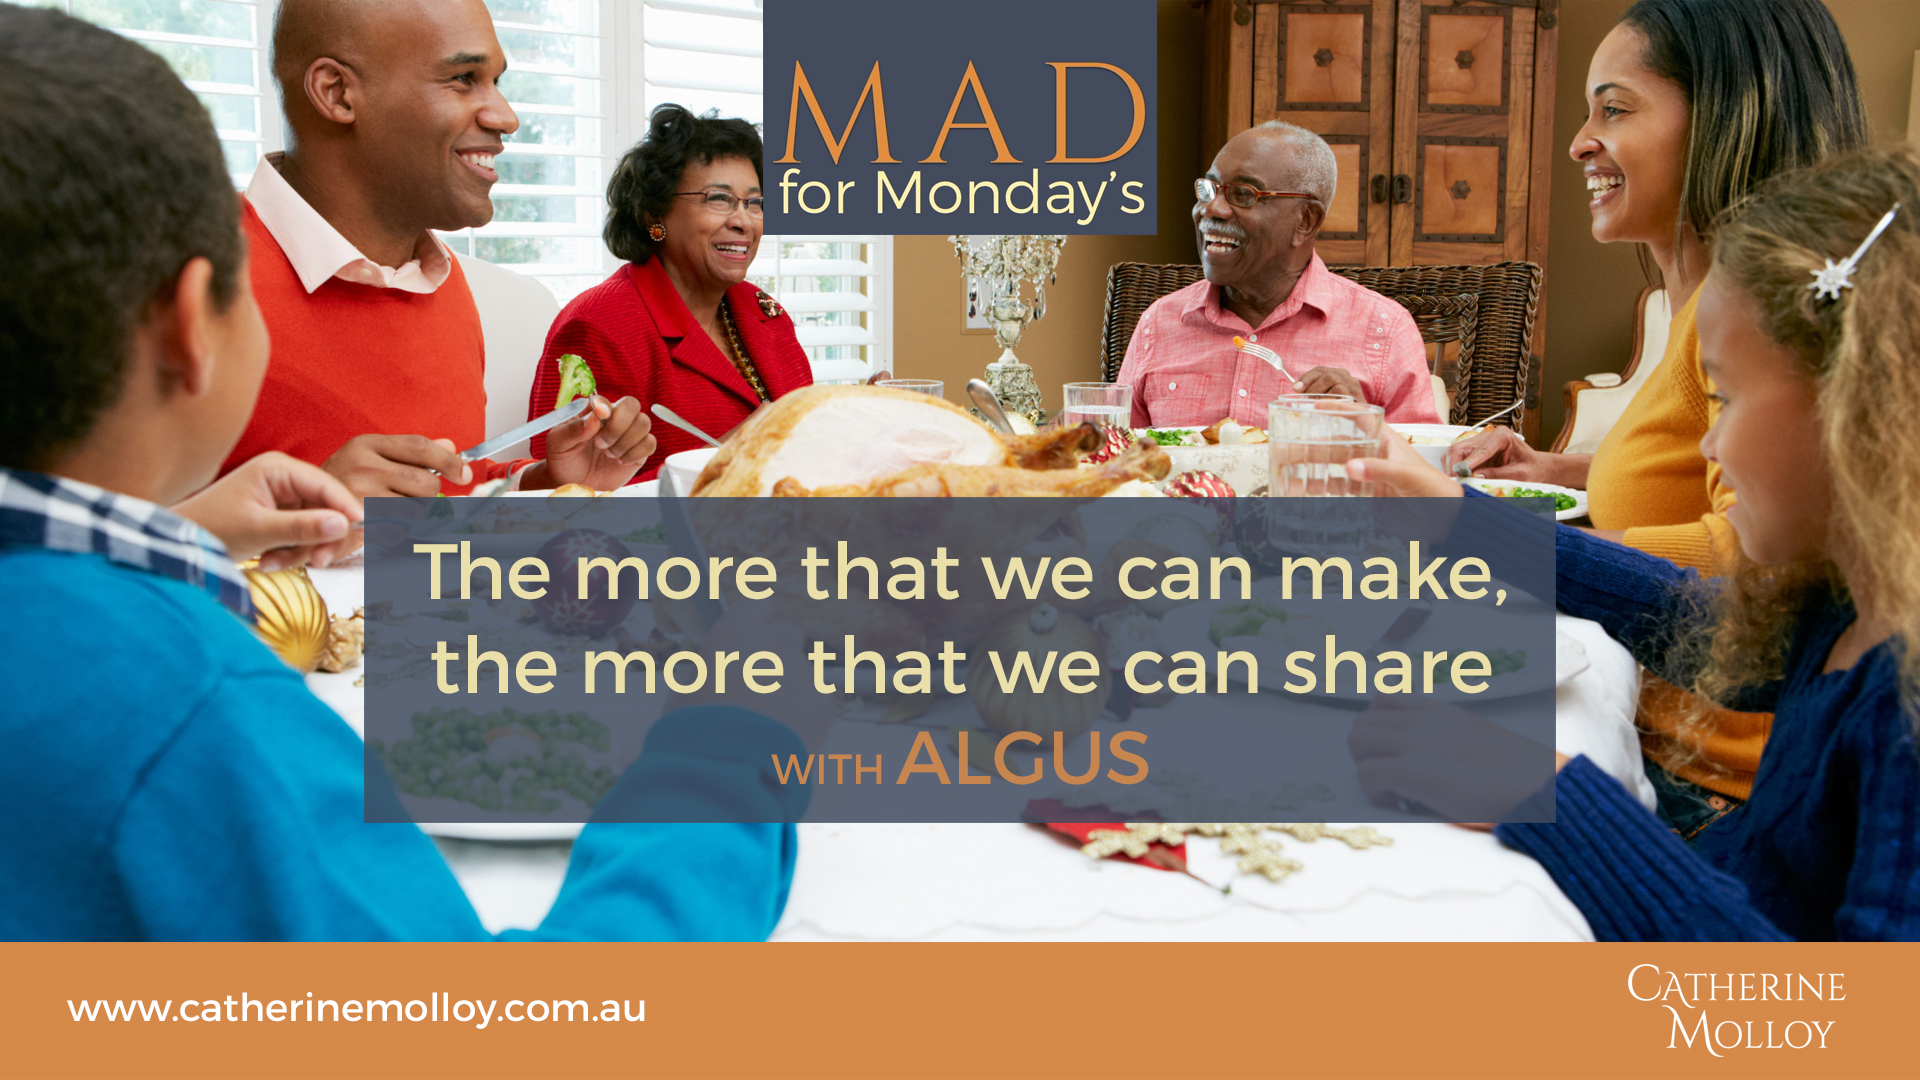 MAD for Monday’s – The more that we can make, the more that we can share